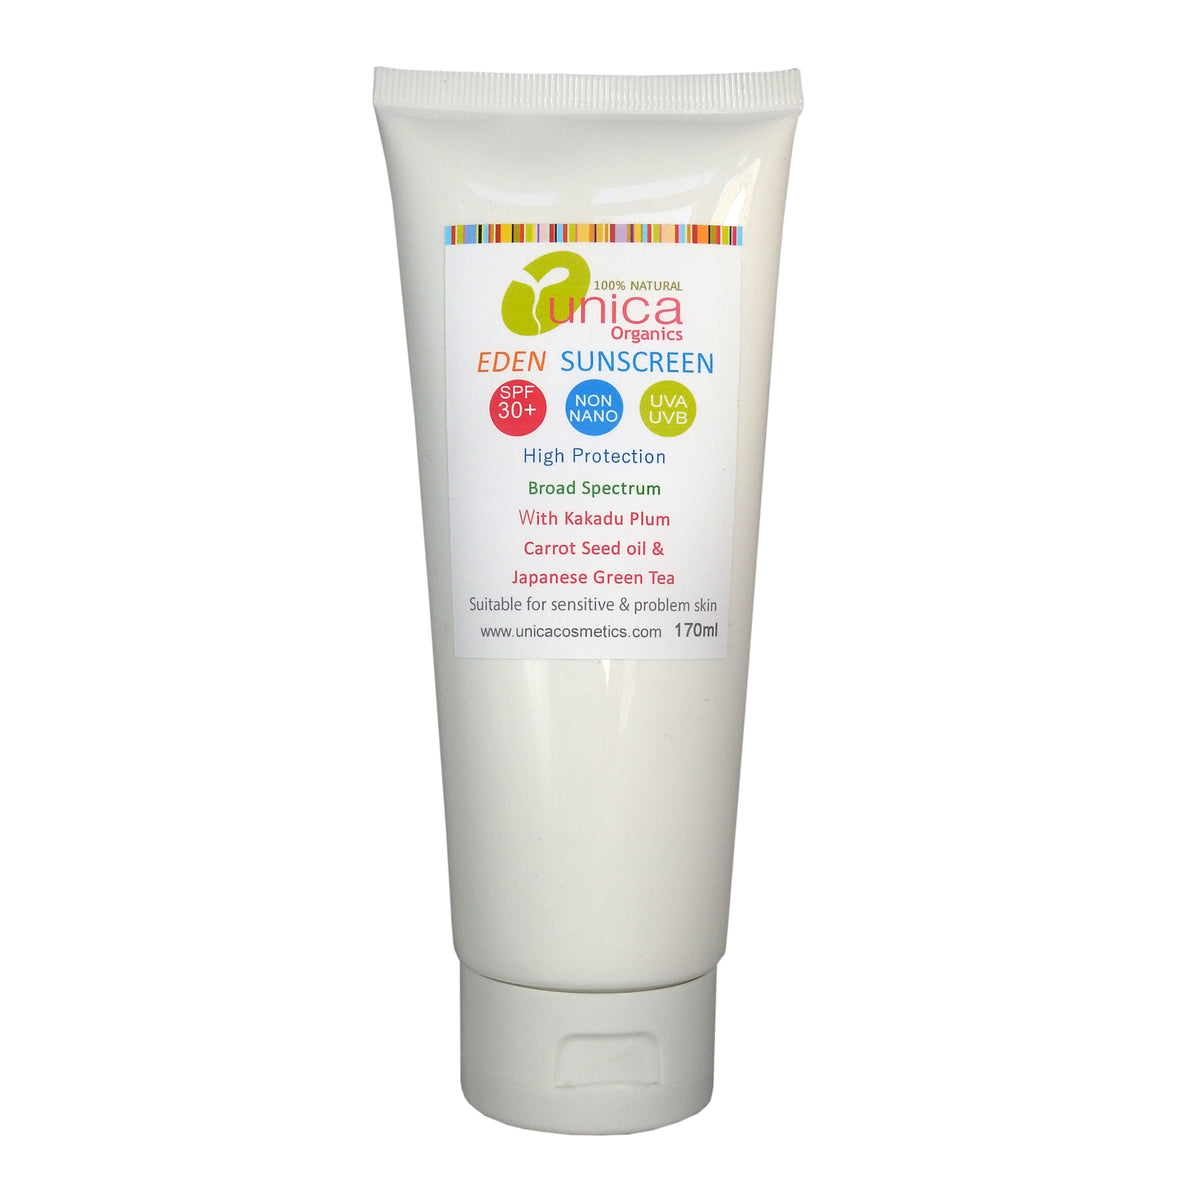 Organic non-nano sun cream with zinc oxide and green tea in a white tube. Suitable for sensitive skin, eczema and psoriasis.